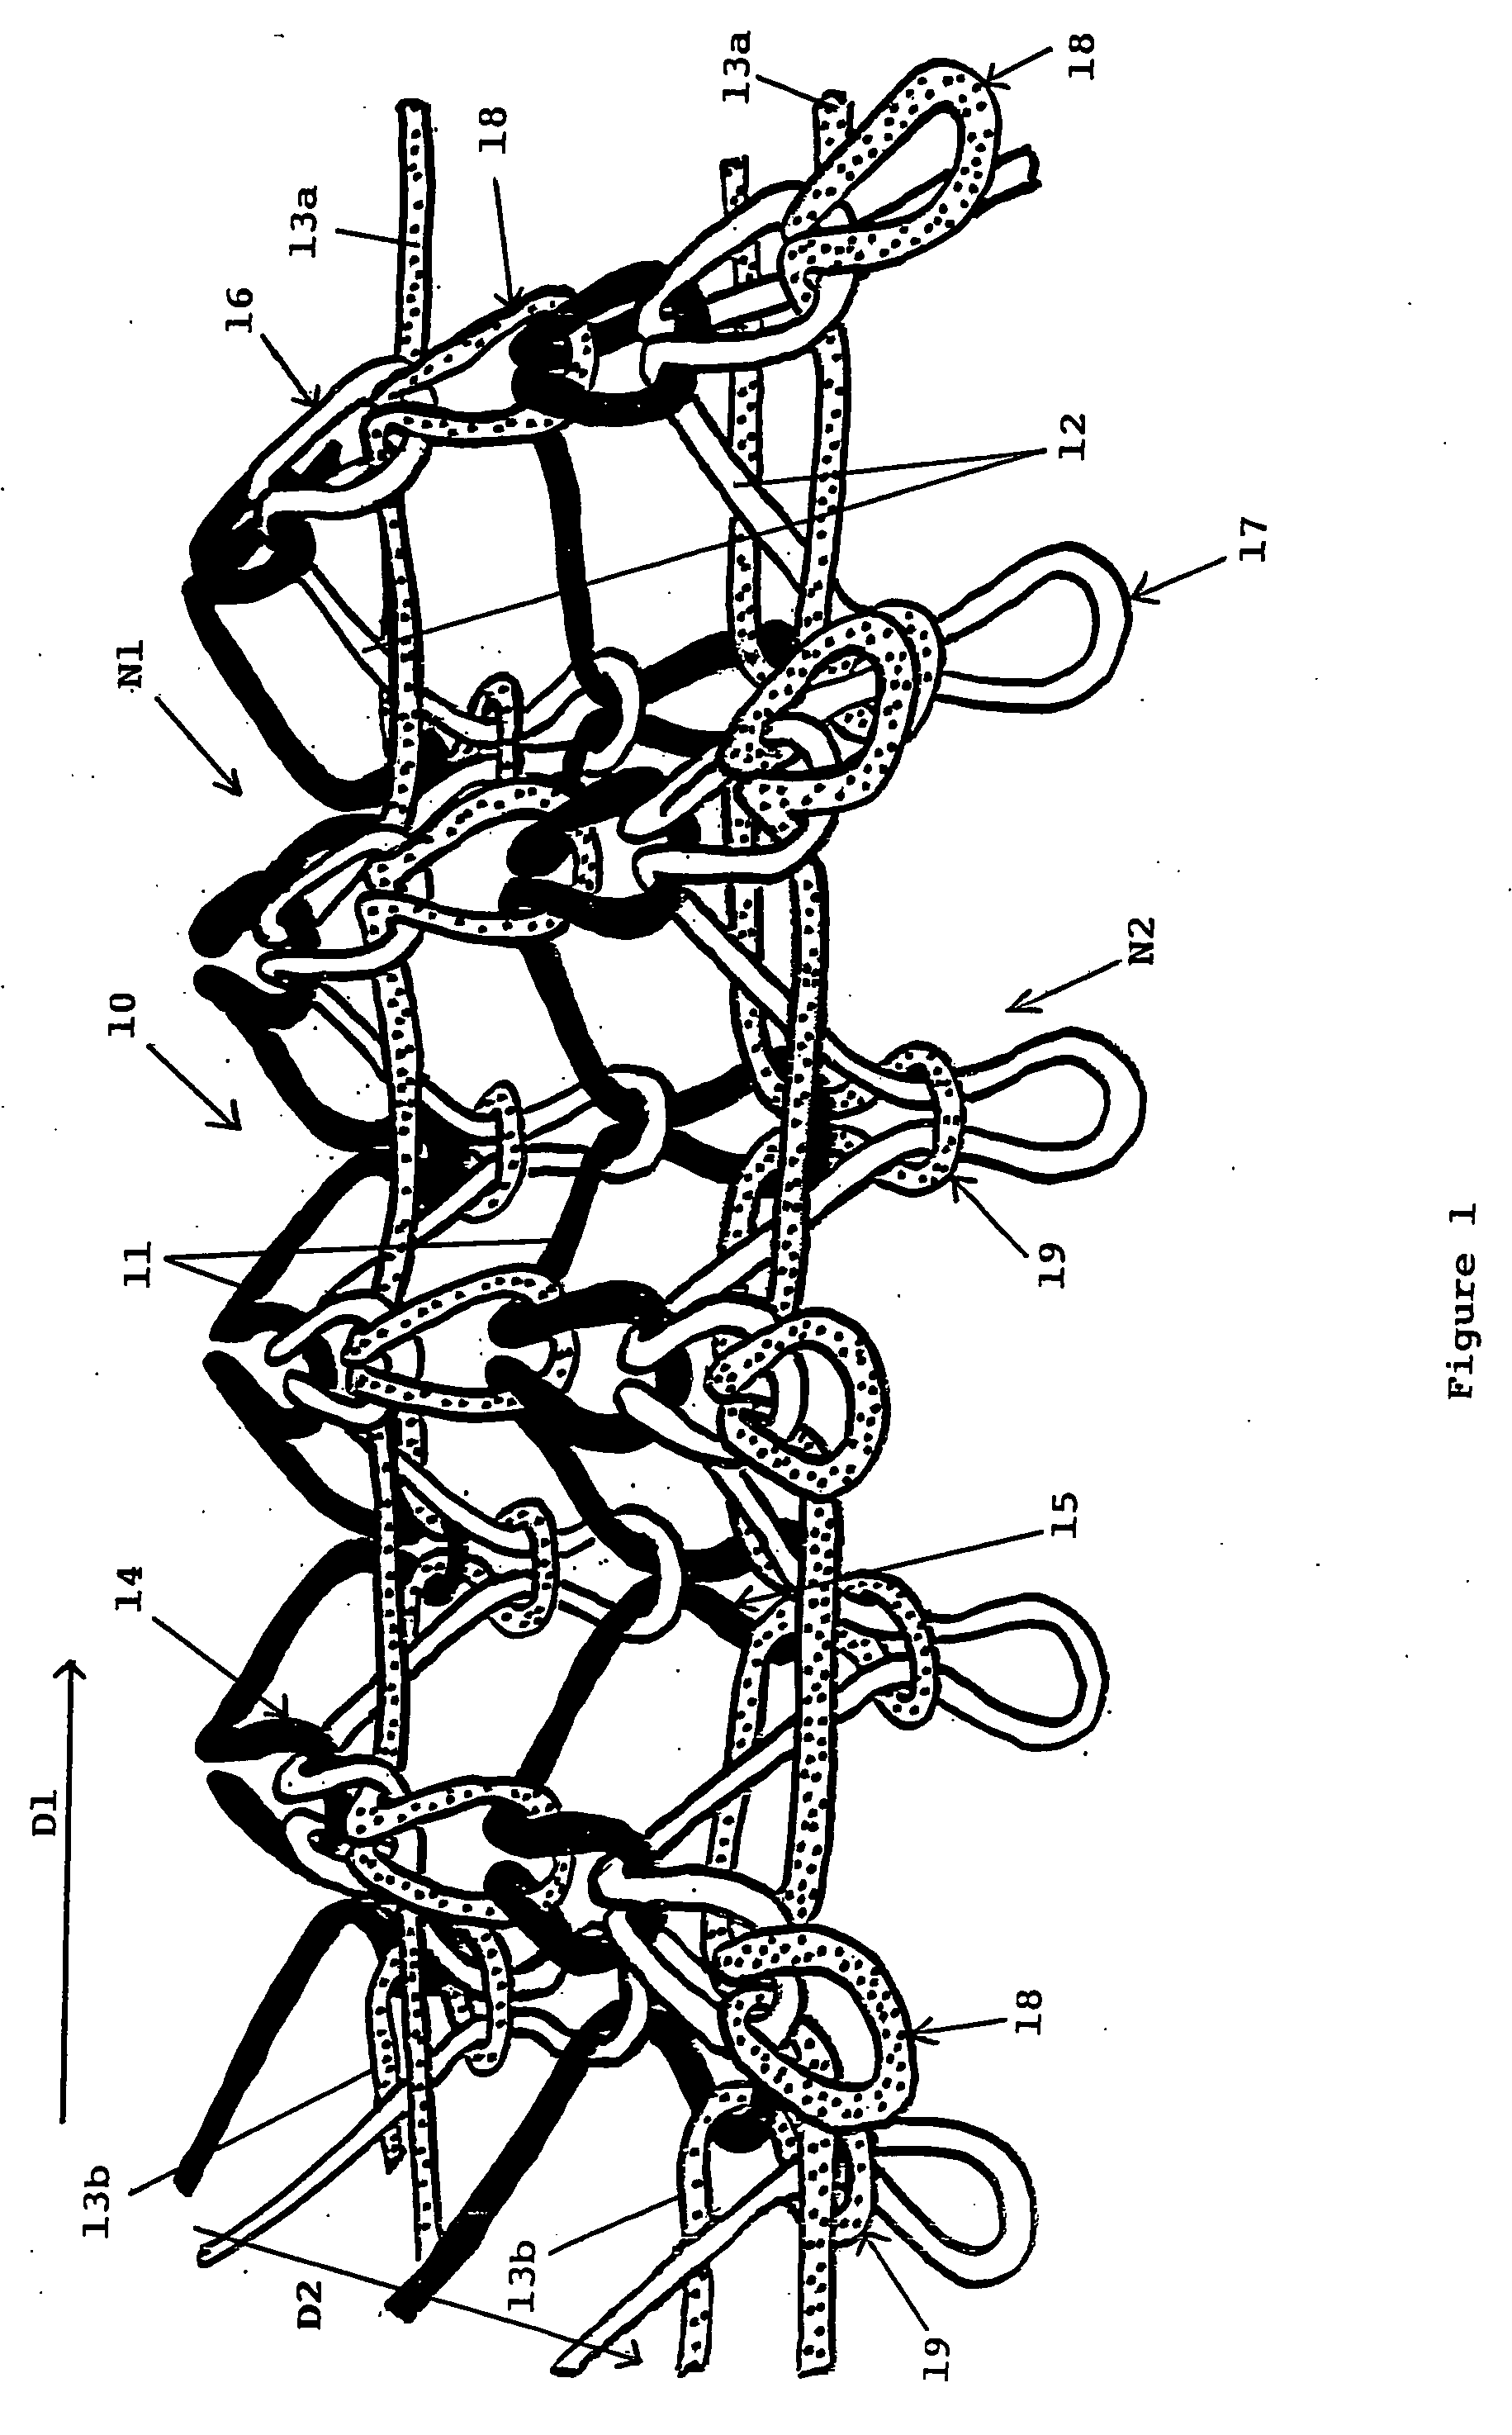 Thermoelectric structure and use of the thermoelectric structure to form a textile structure